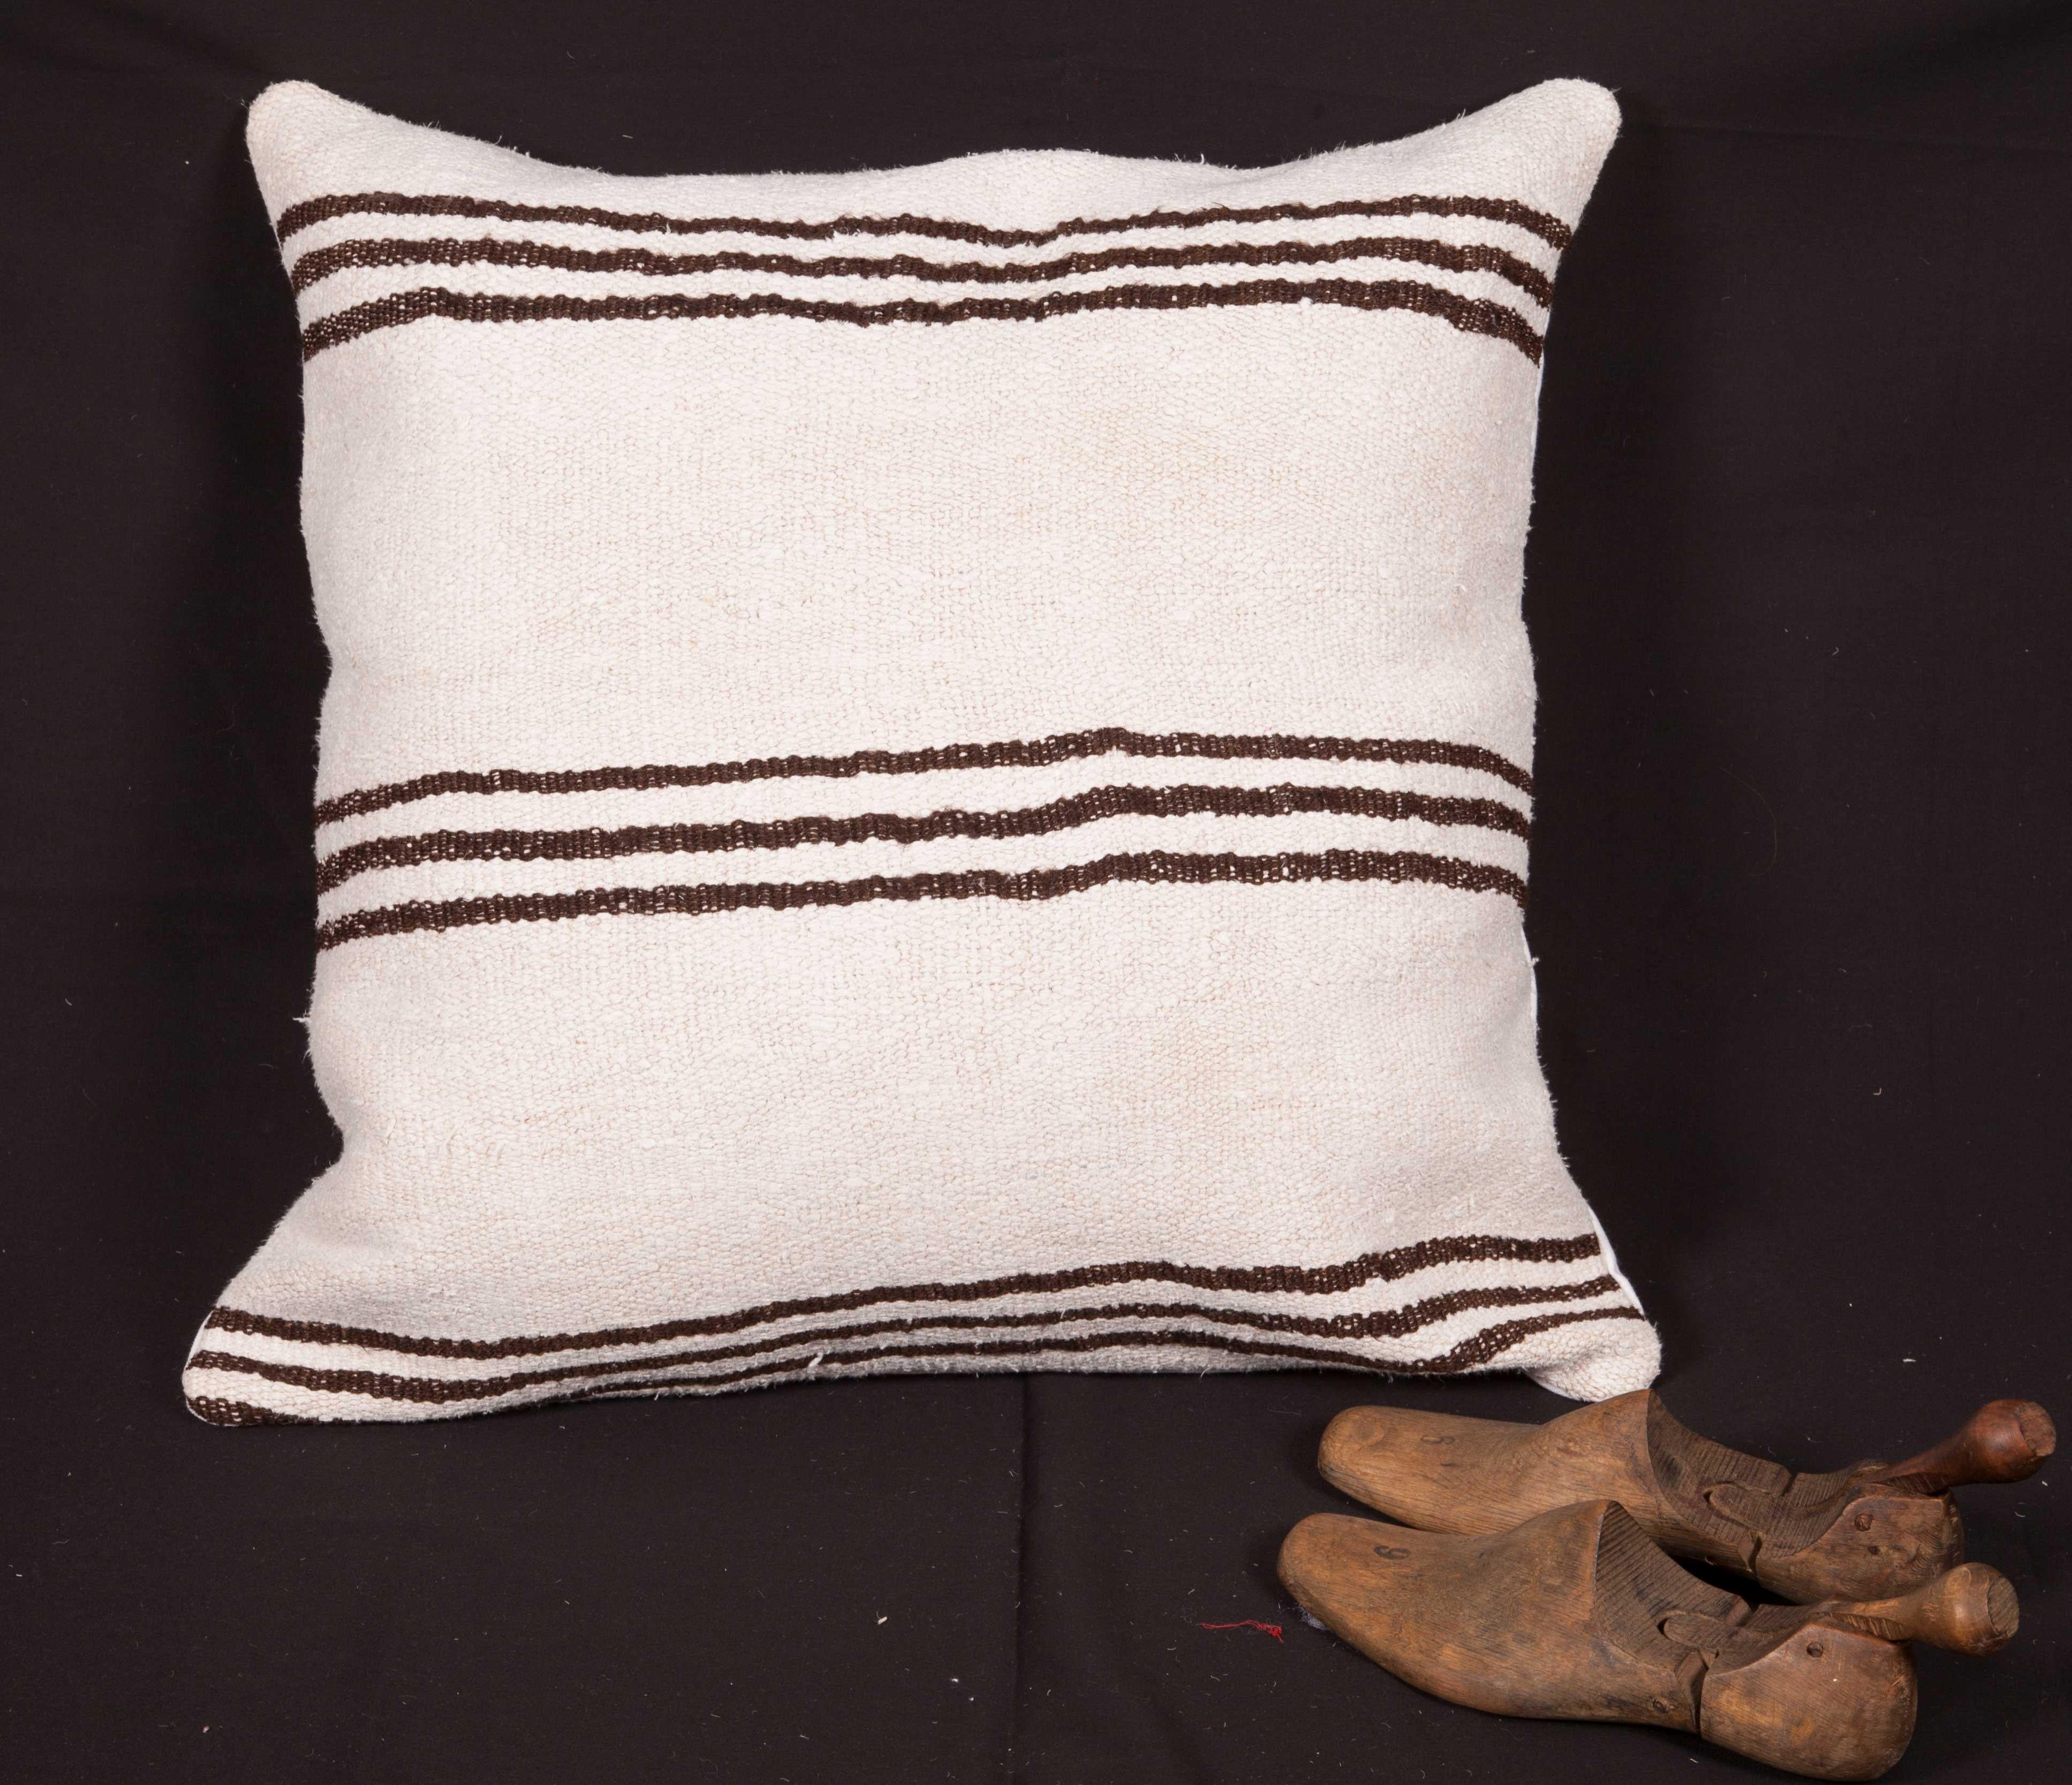 The pillow is made from a vintage Anatolian Hemp Kilim. It does not come with an insert but comes with a bag made to the size and out of cotton to accommodate the filling. The backing is made of linen. Please note filling is not provided. Since the